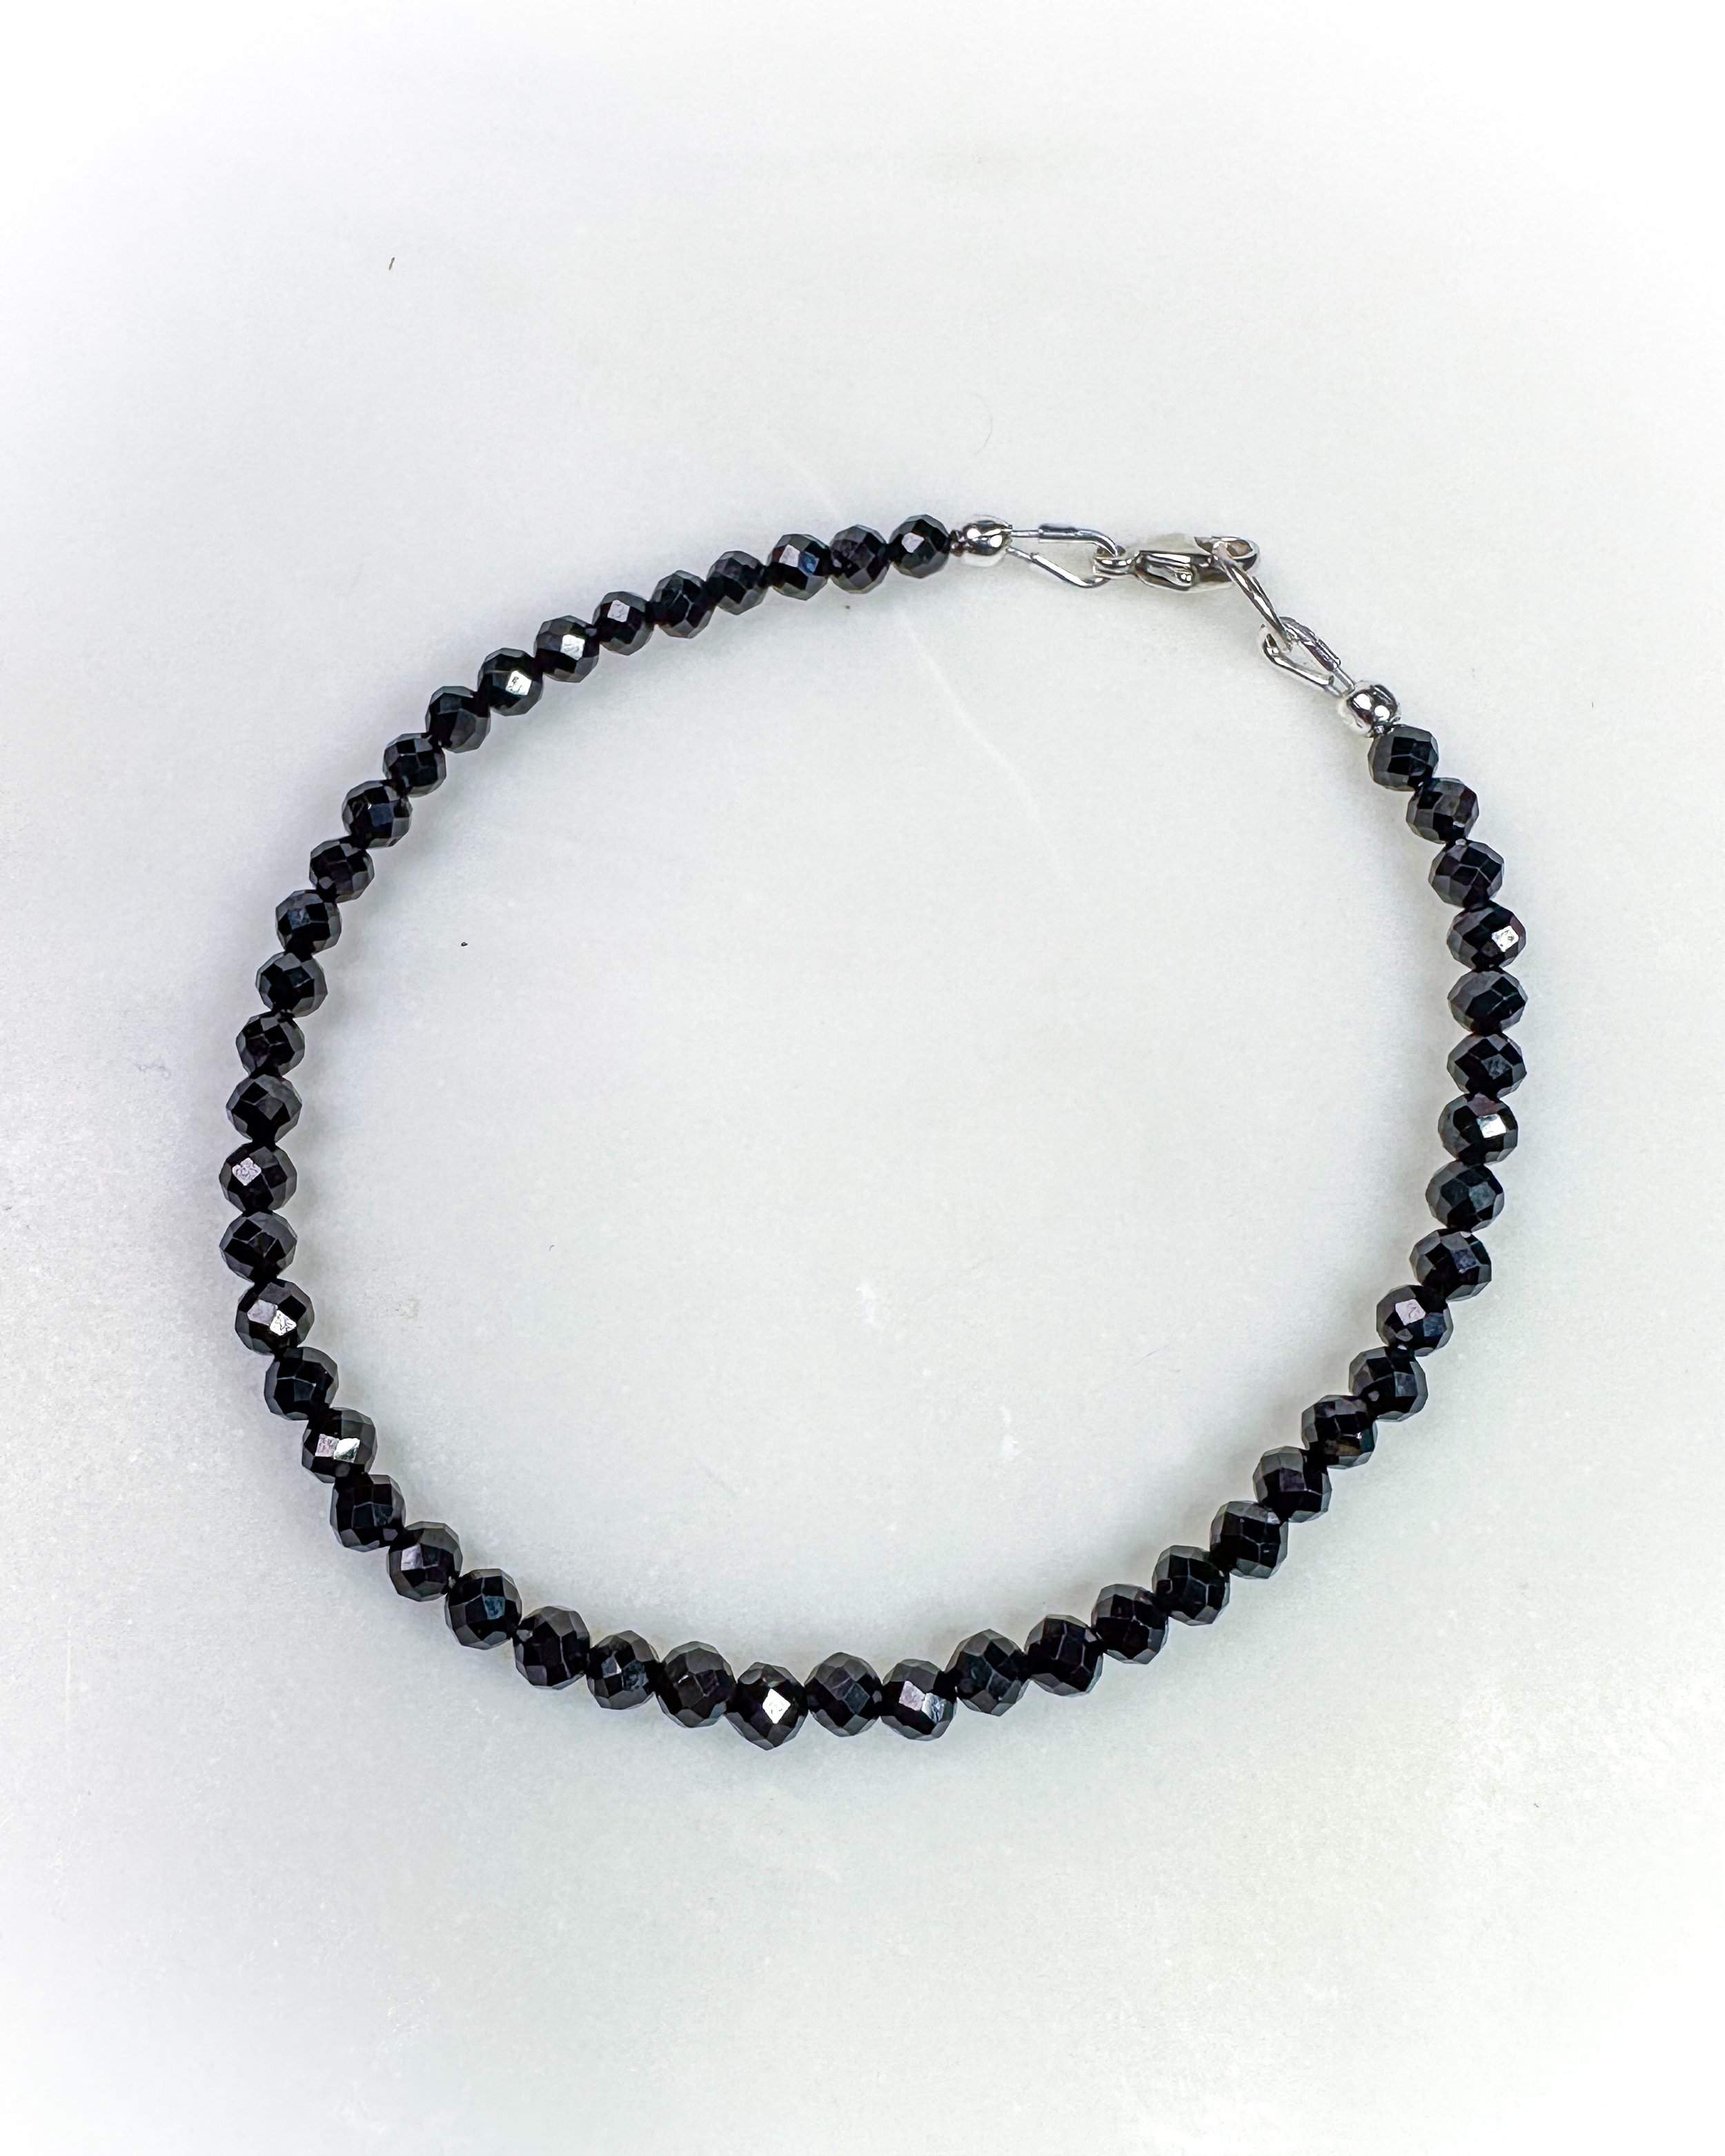 2mm Black Spinel Bracelet with 2mm Gold Beads – 100%Beads